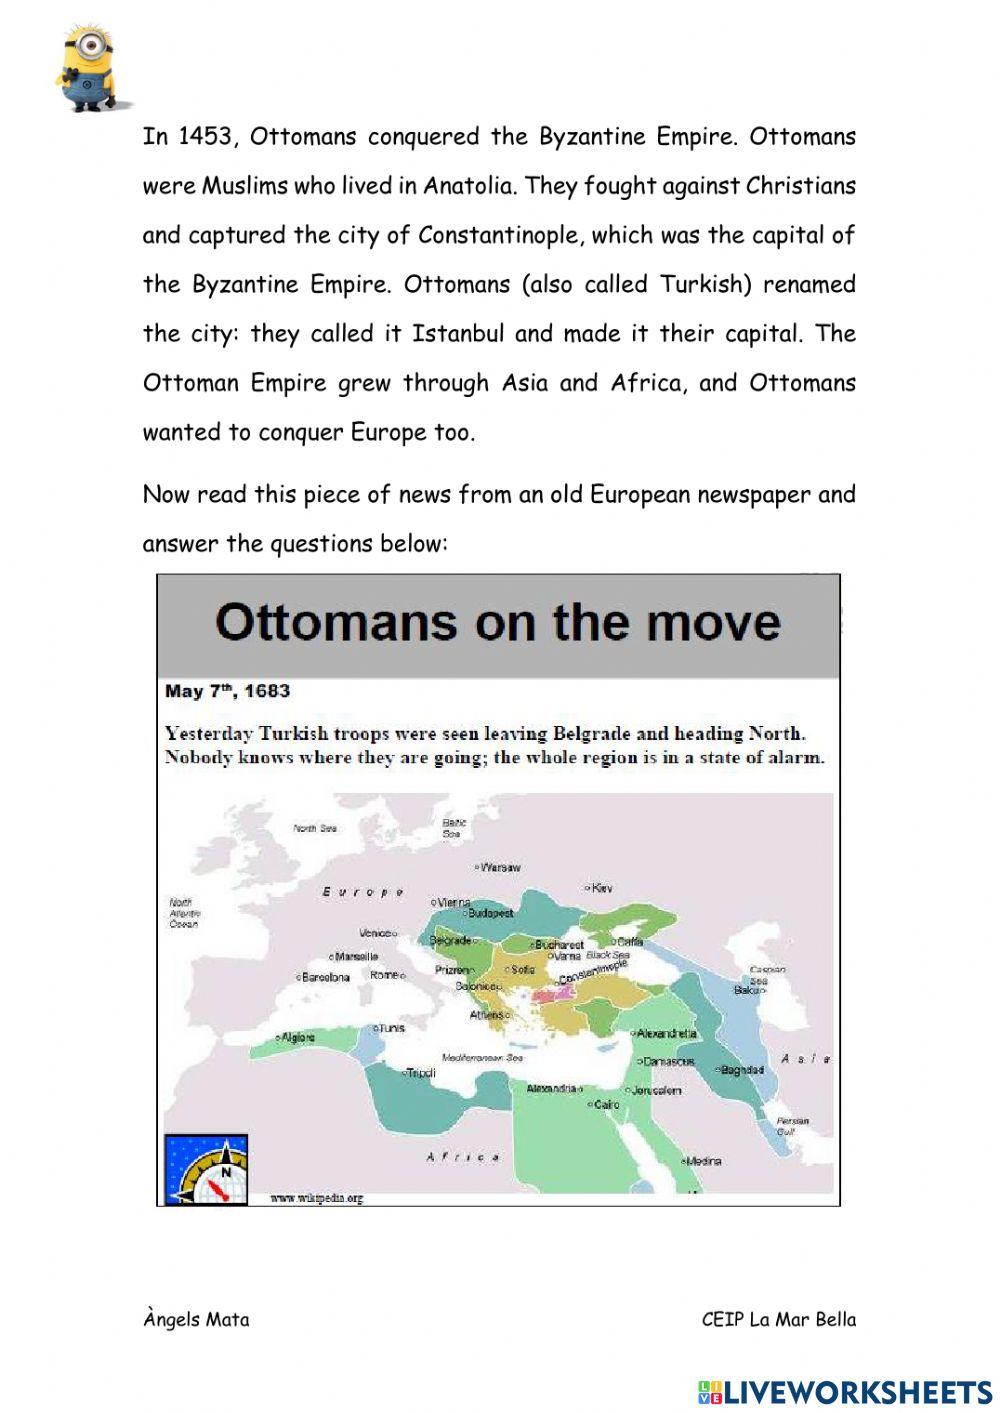 Ottomans on the move